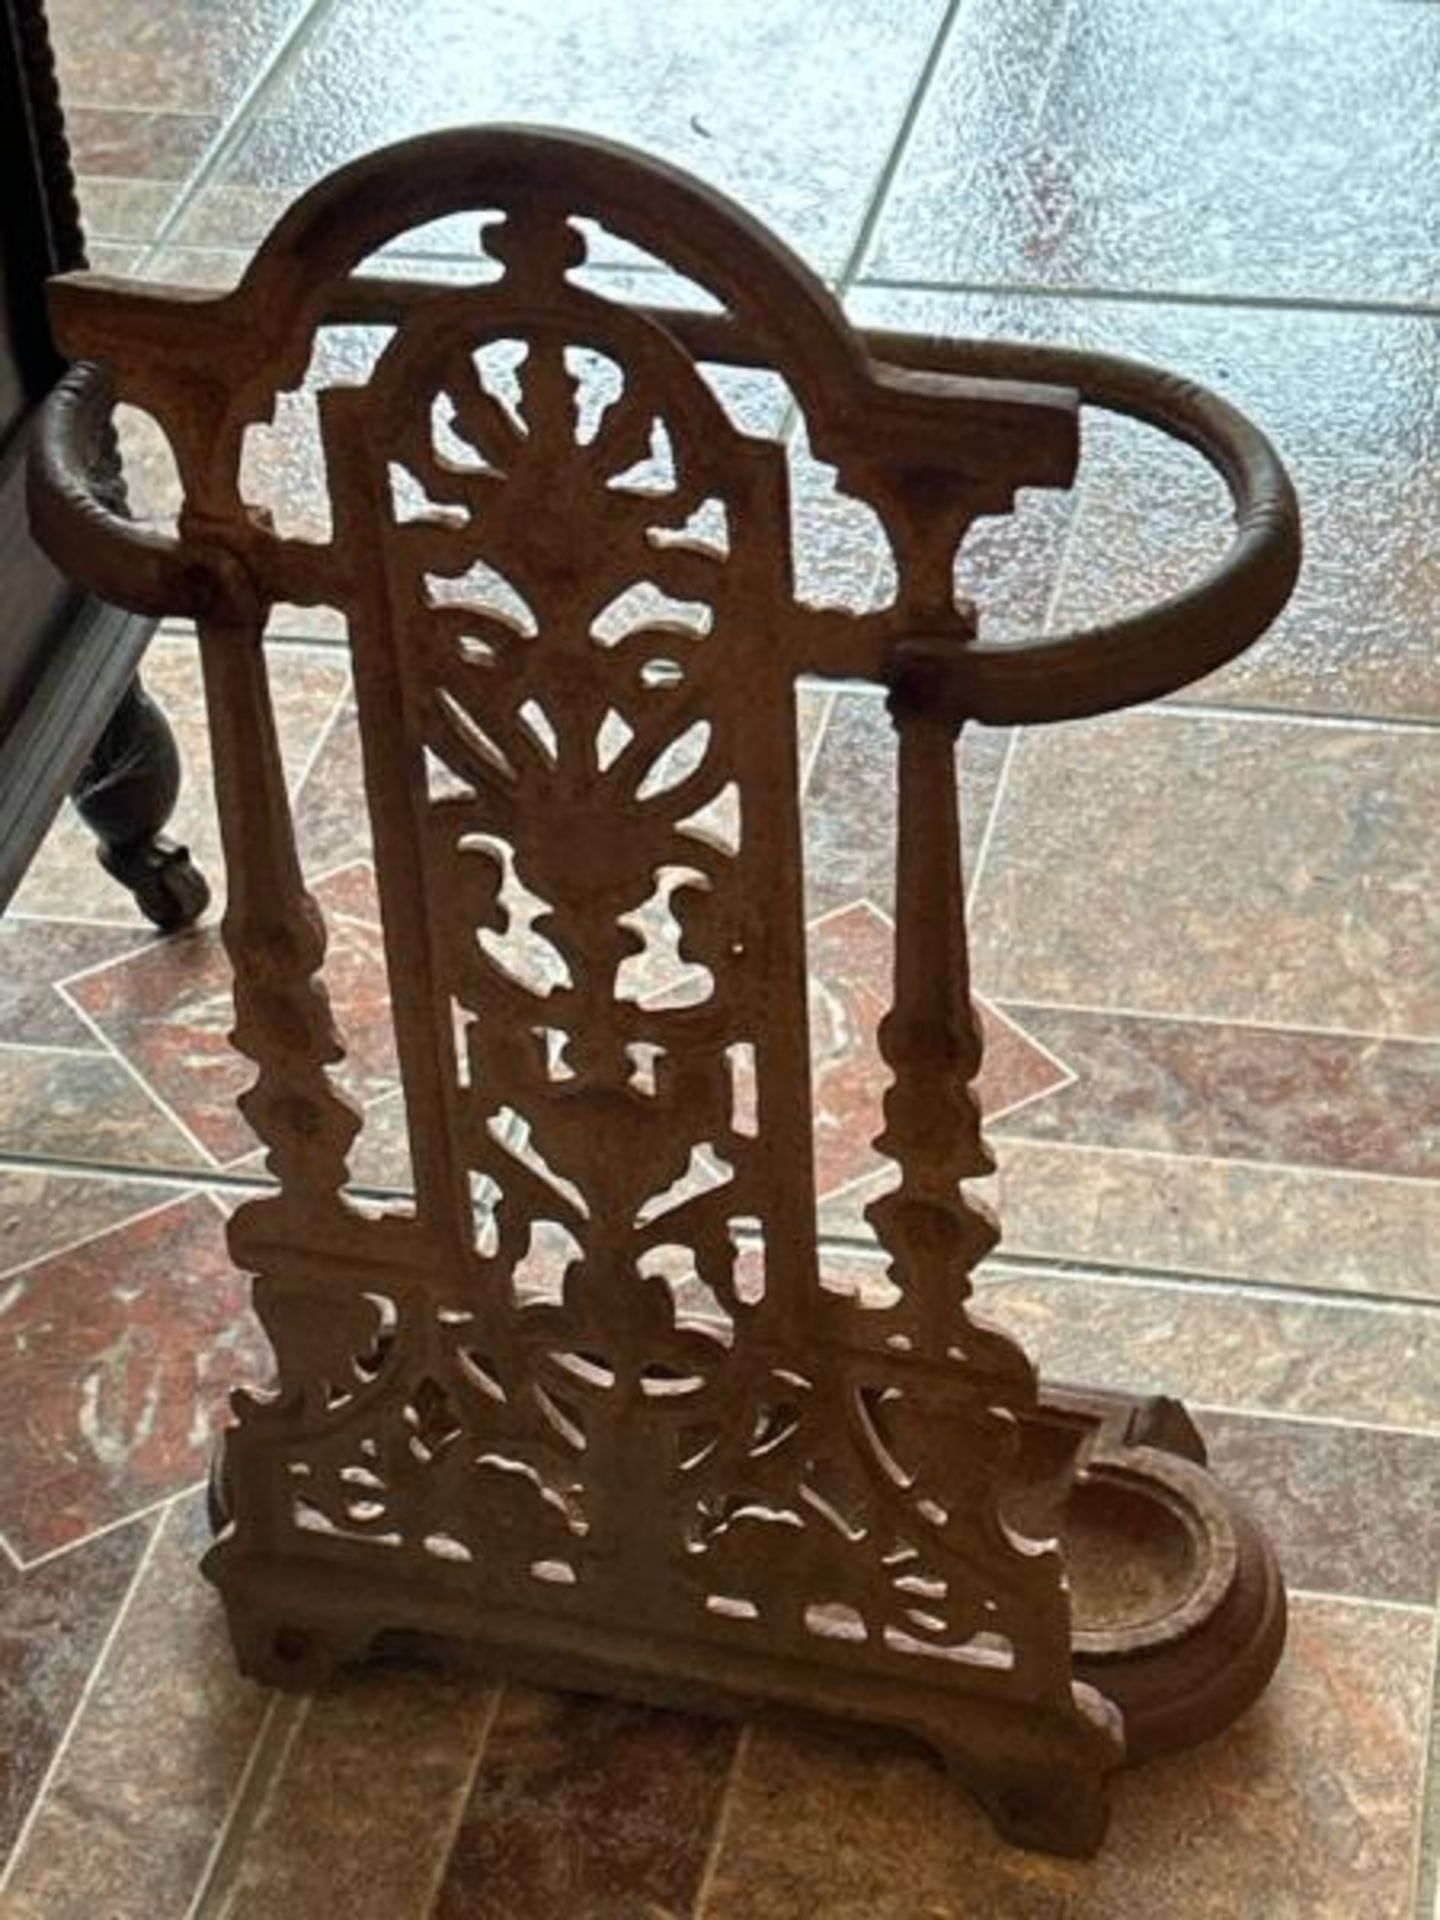 cast iron umbrella stand, 50cm high (collection from private residence in Weybridge, Surrey) - Image 2 of 2